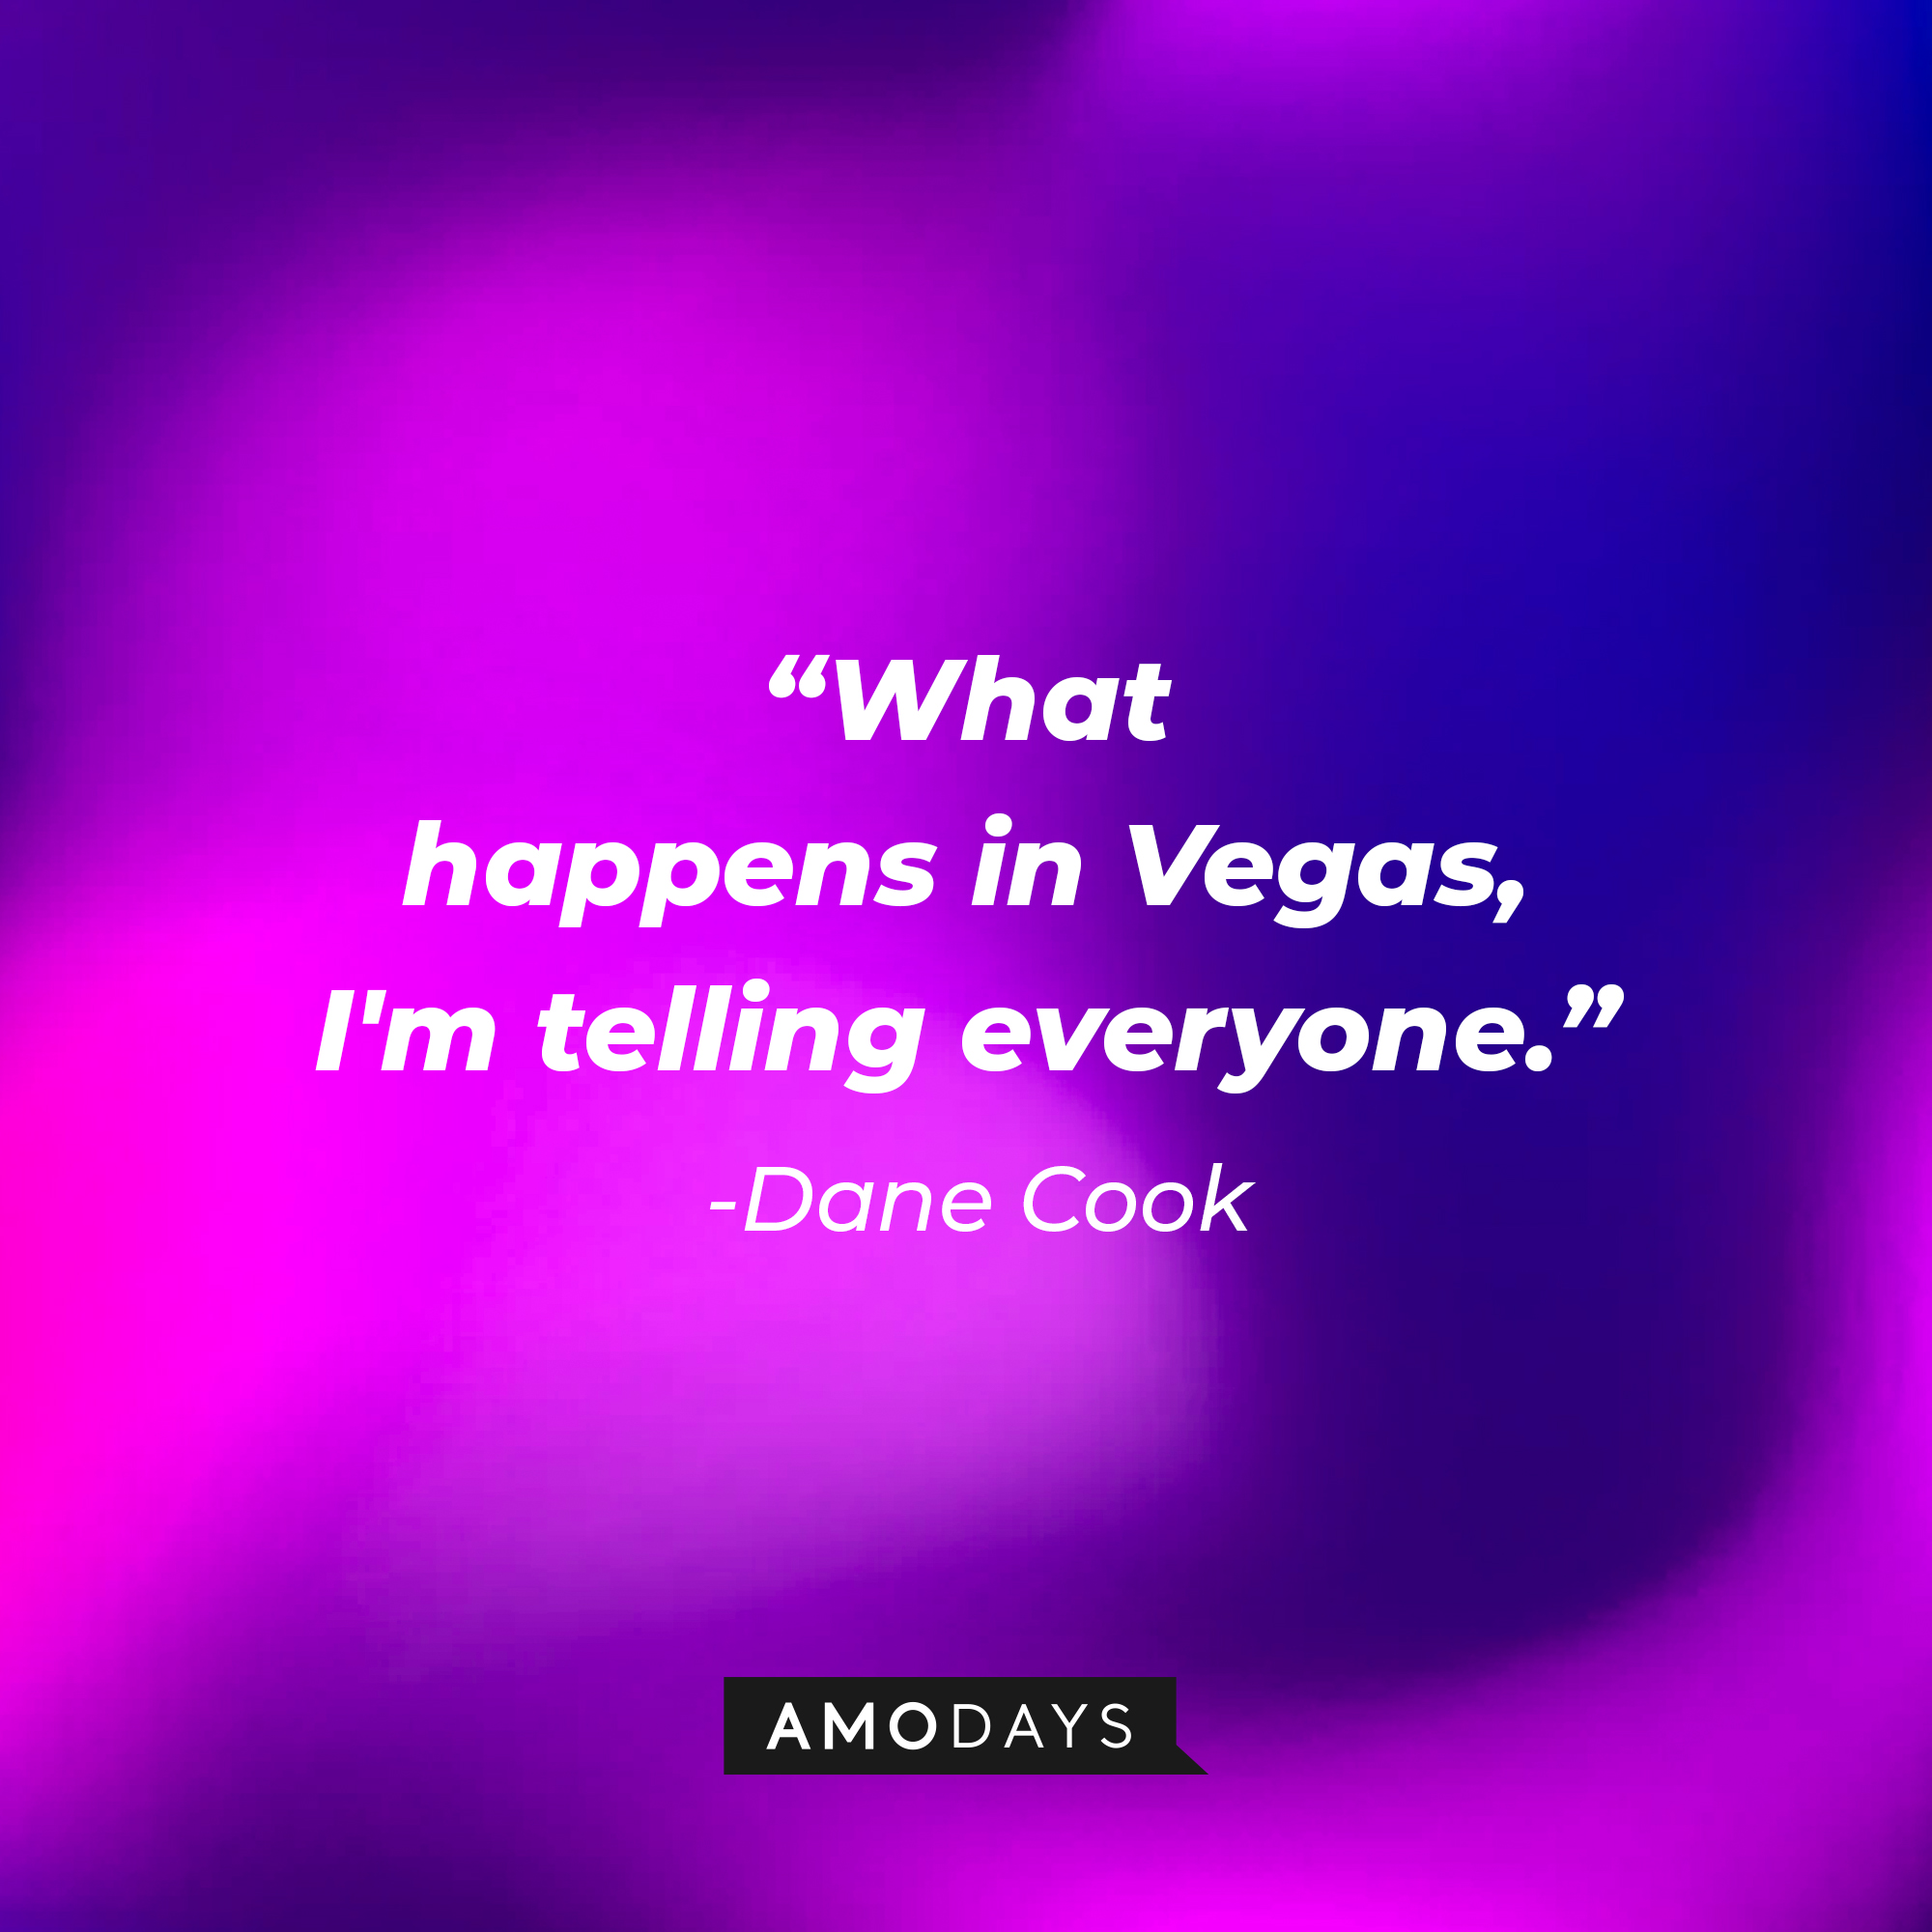 Dane Cook's quote: “What happens in Vegas, I'm telling everyone.” | Source: Amodays